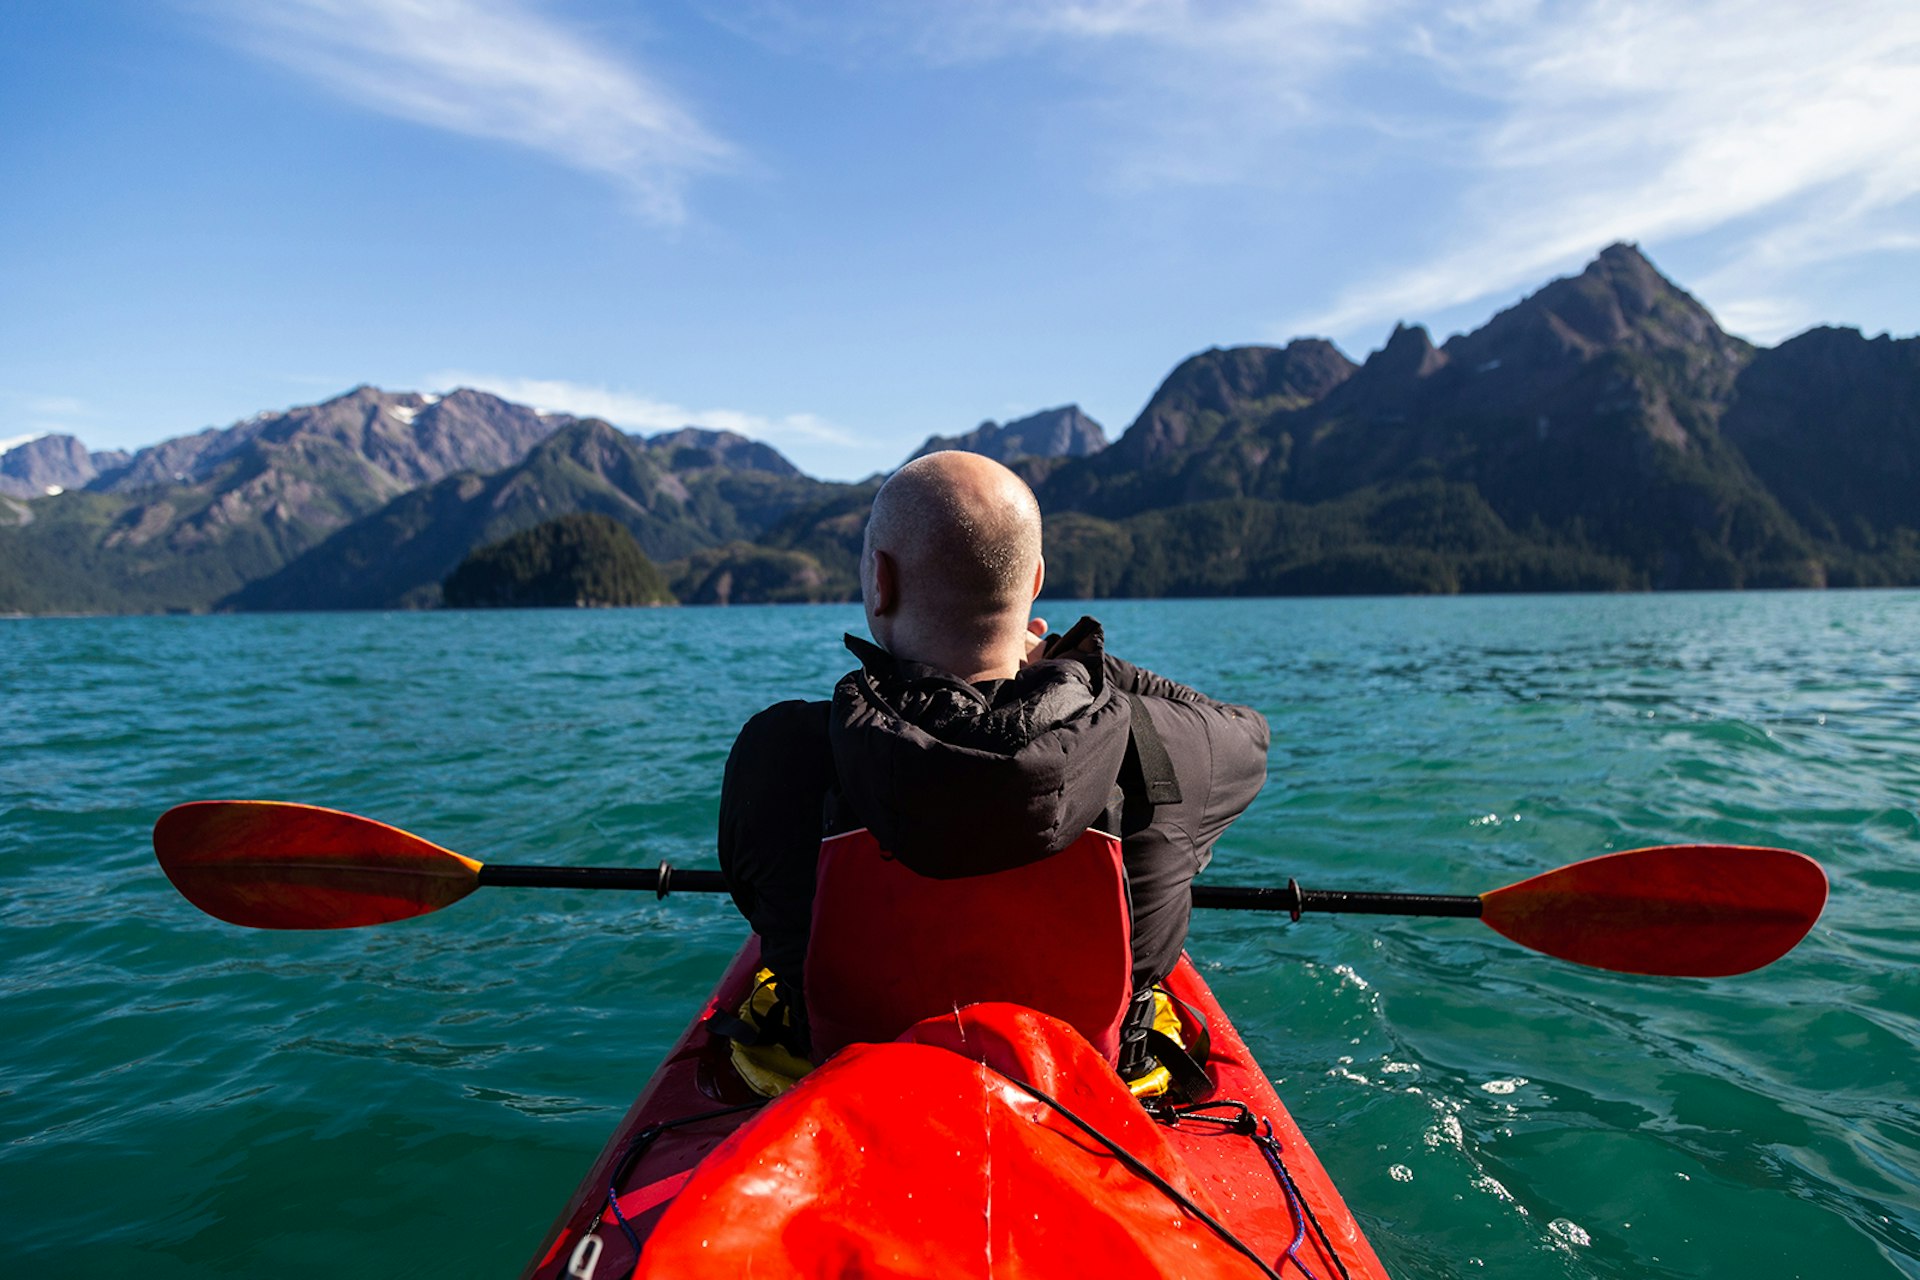 A kayaker in a red kayak looks across turquoise water to rugged mountain peaks